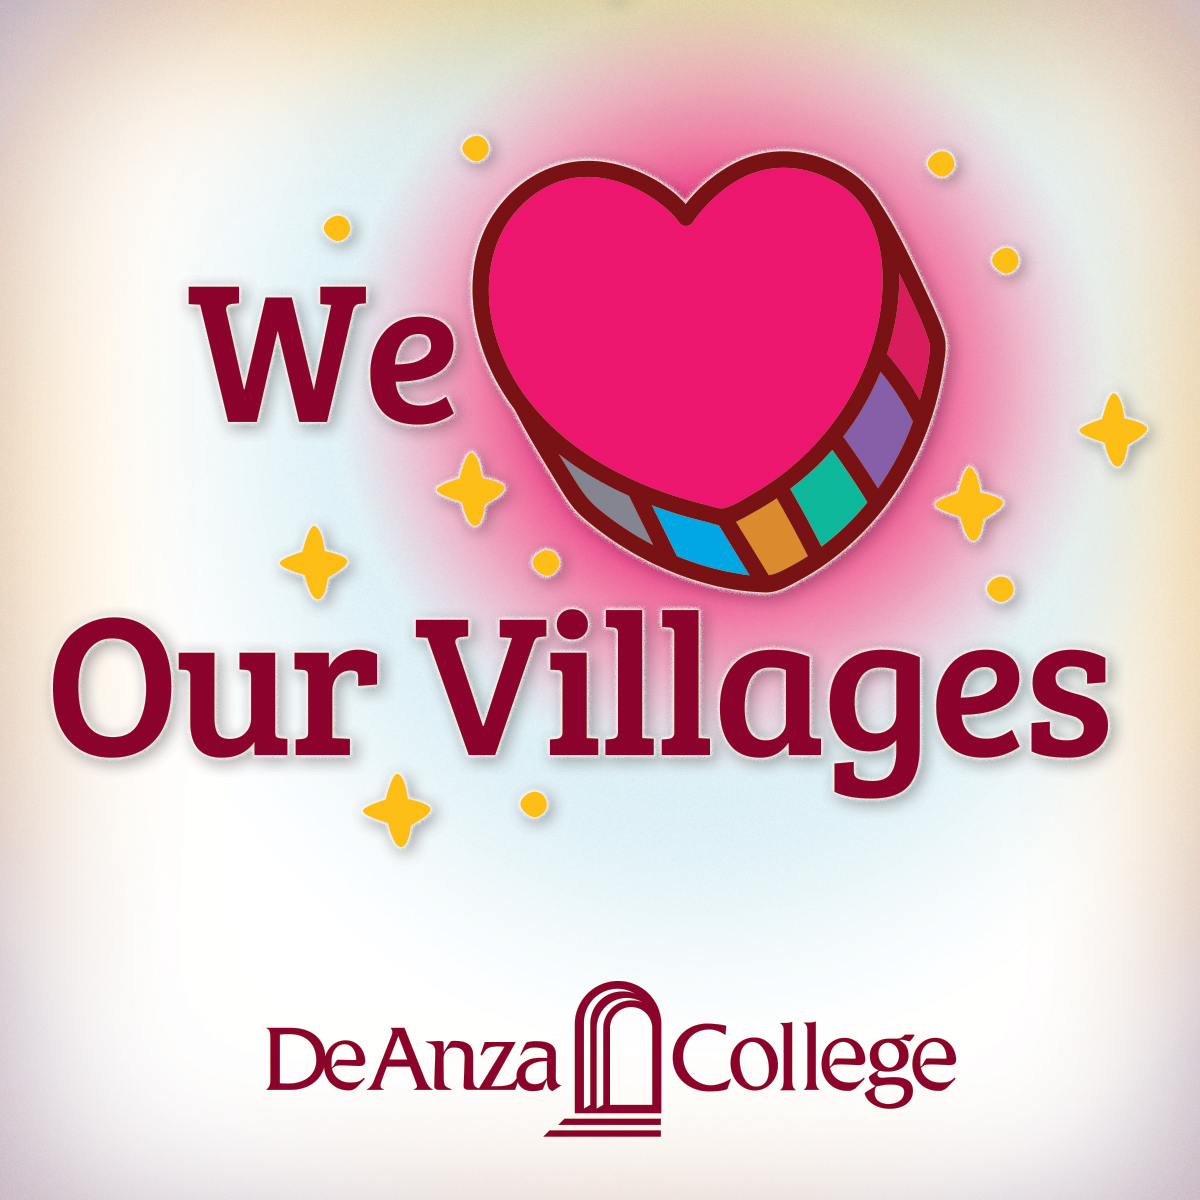 We [heart] Our Villages